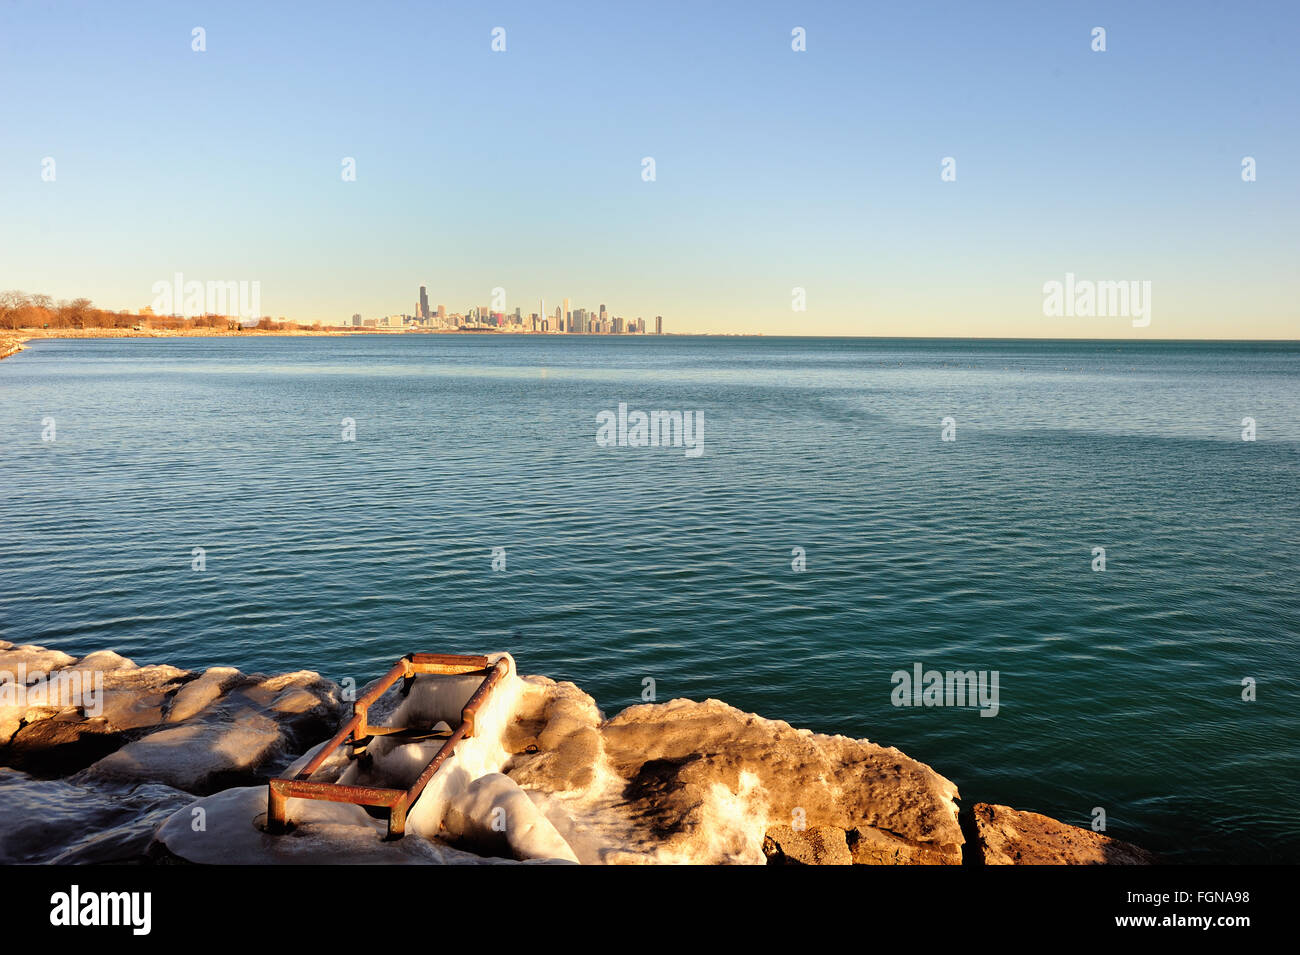 The Chicago skyline beyond the open waters of Lake Michigan as seen from a distance of about eight miles away. Chicago, Illinois, USA. Stock Photo